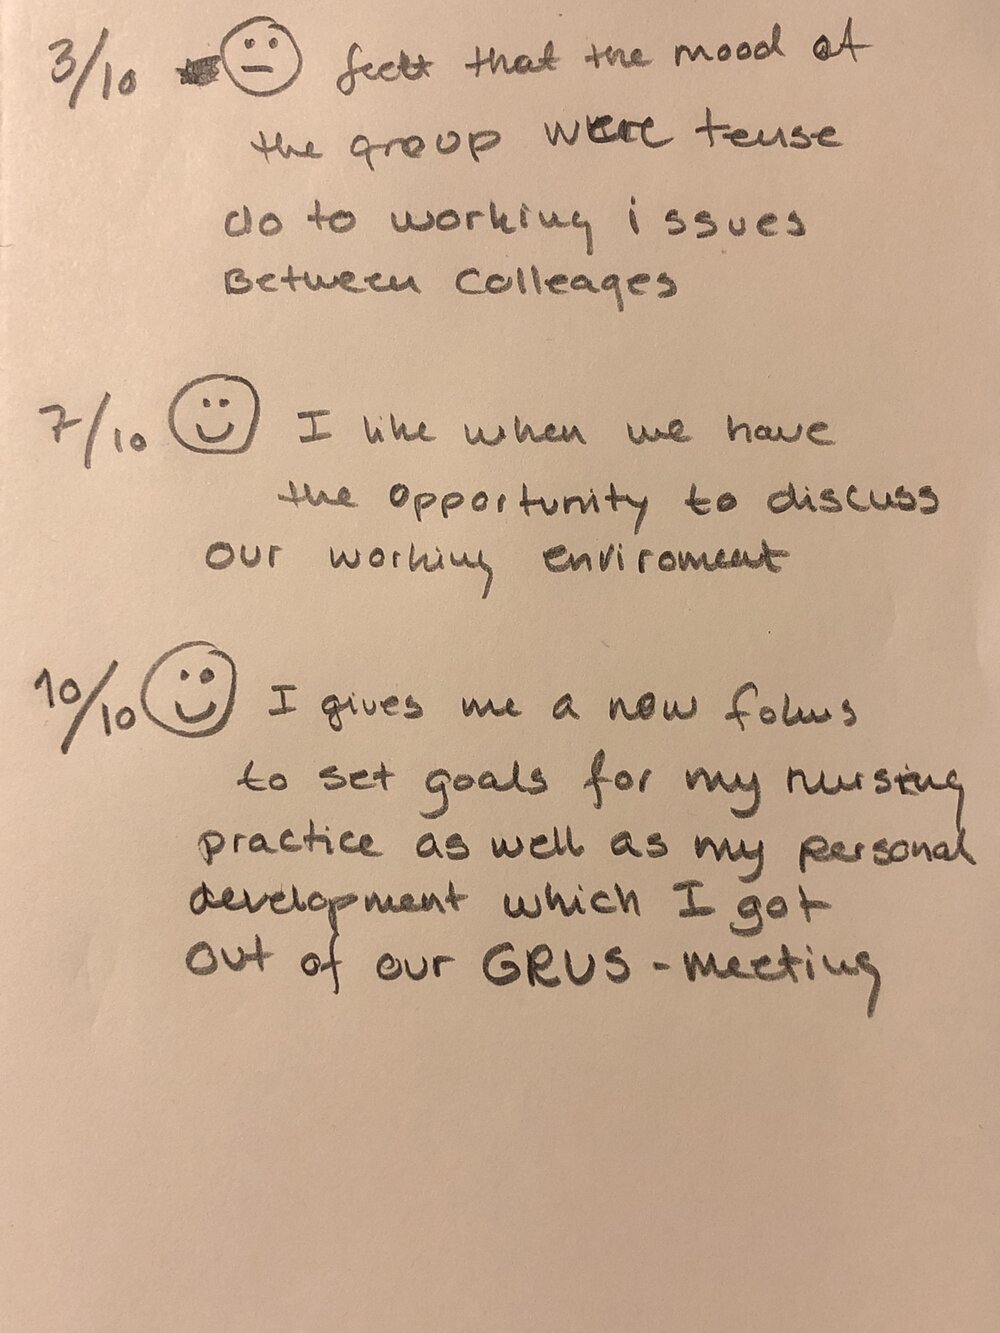 An entry from one of the caregivers' journal entry, which was sparsel filled up (and the caregiver was the only person out of 5 caregivers to return a filled journal)